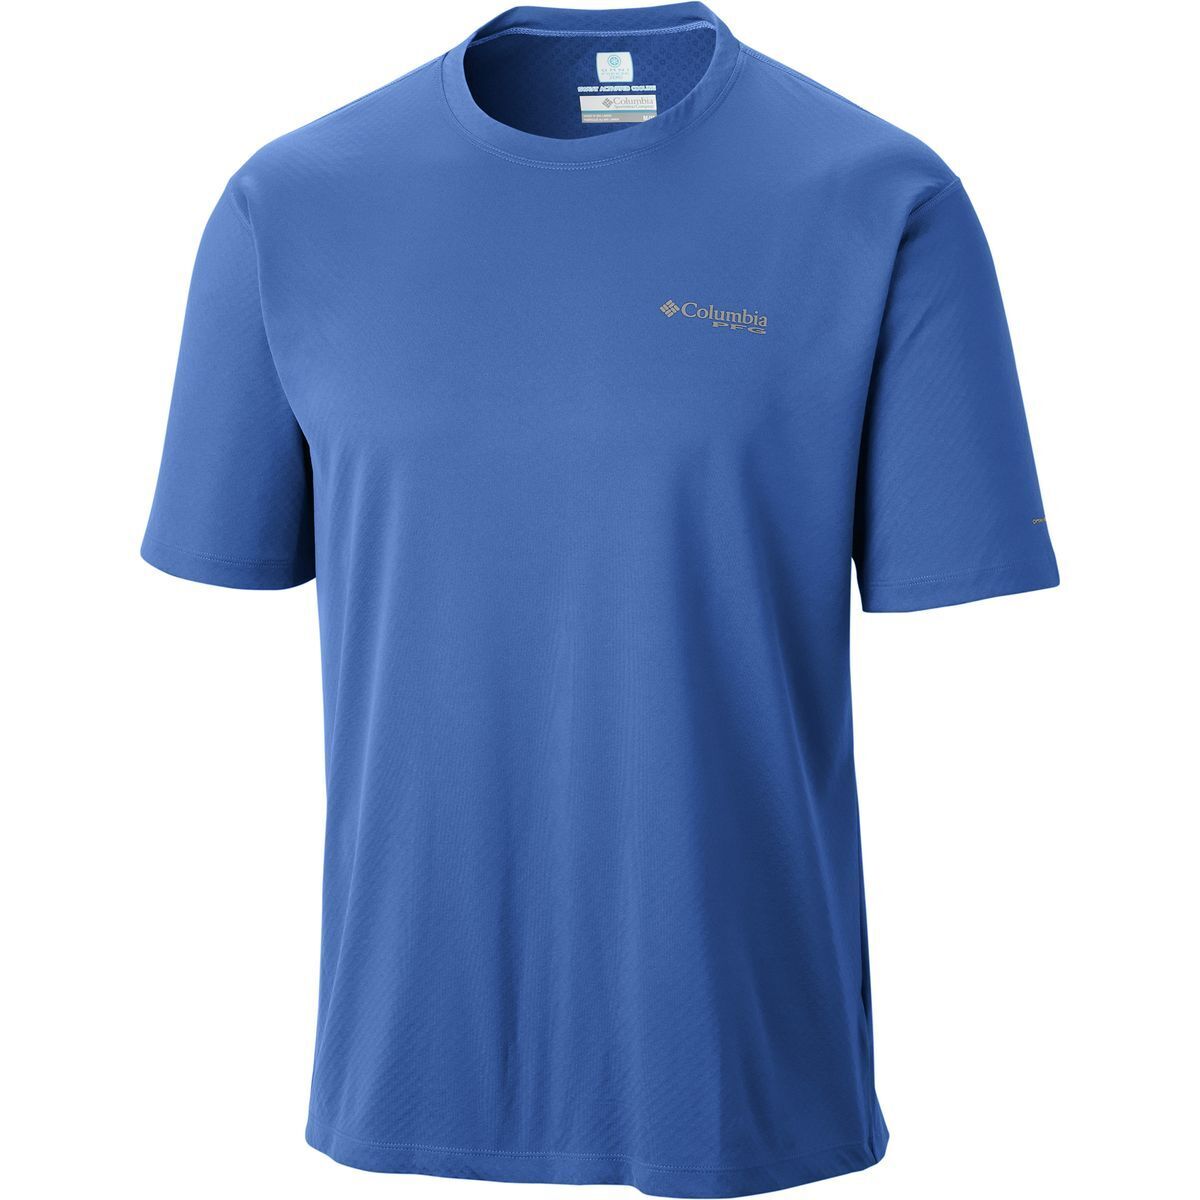 Be Cool with the Columbia Zero Rules PFG Shirt